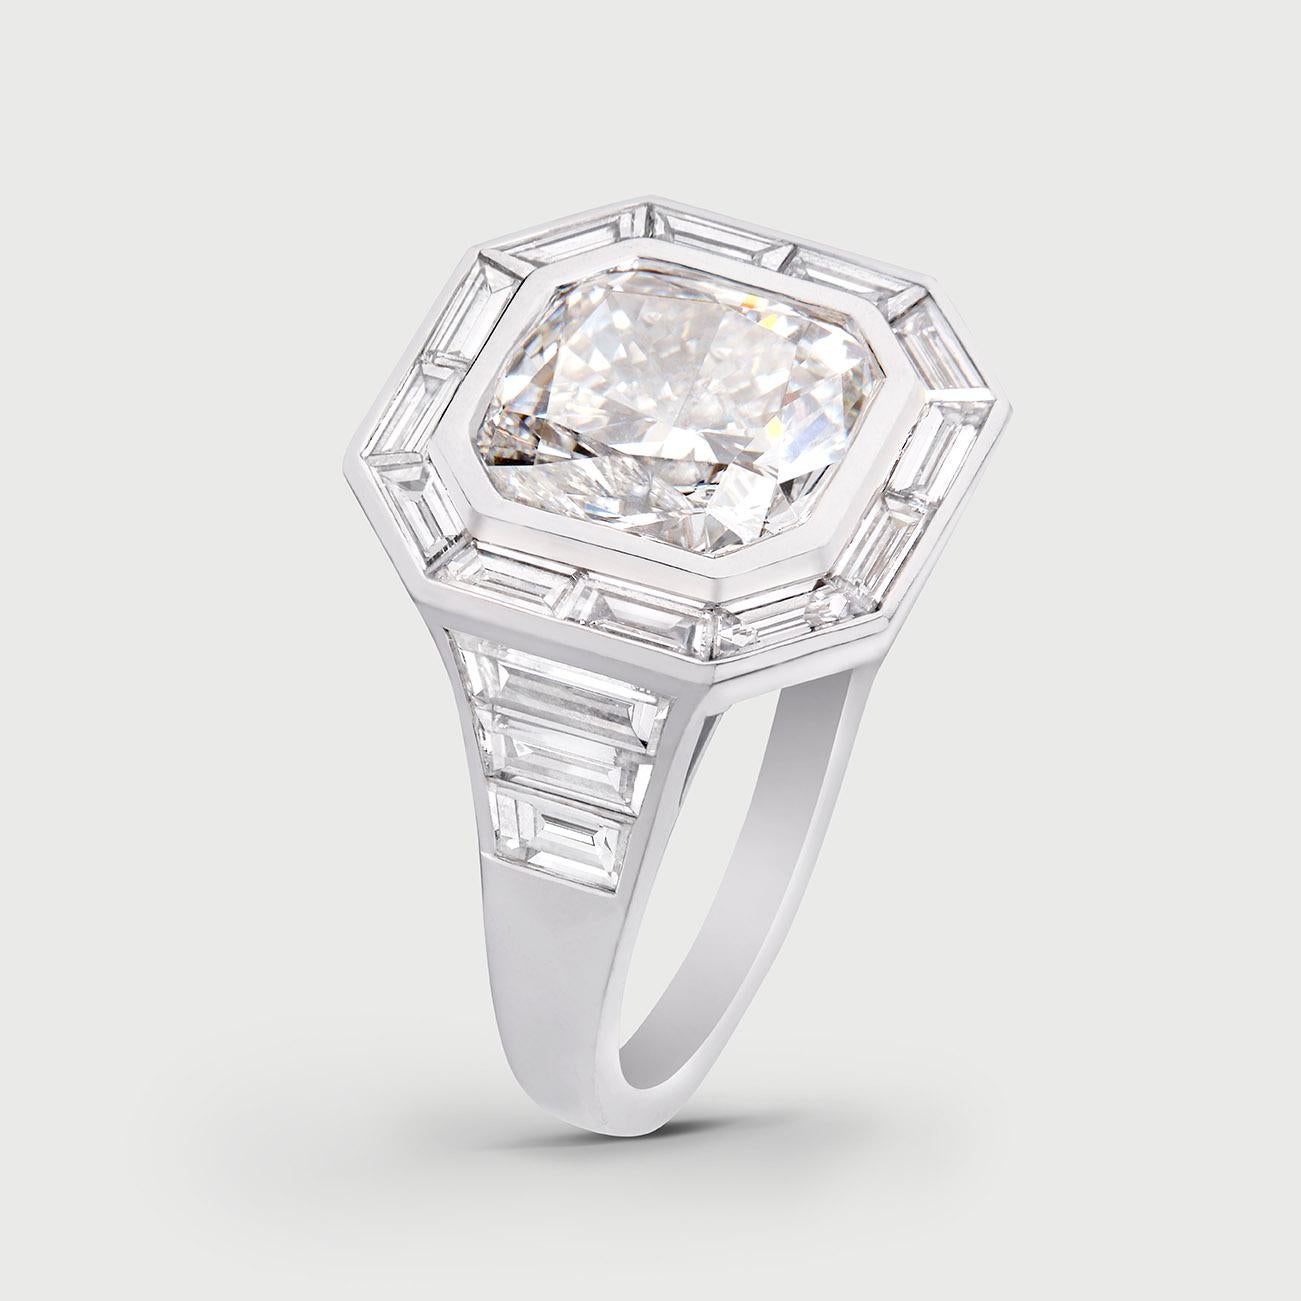 Art Deco inspired ring crafted in 18K White Gold

Carat total weight (Cushion Cut centre stone): 3 ct.
Carat total weight (Diamond Side baguettes): 2 ct.
Carat total weight: 5 ct.
GIA Certified: G / Si1

Handcrafted in Italy. 

Can be worn as an